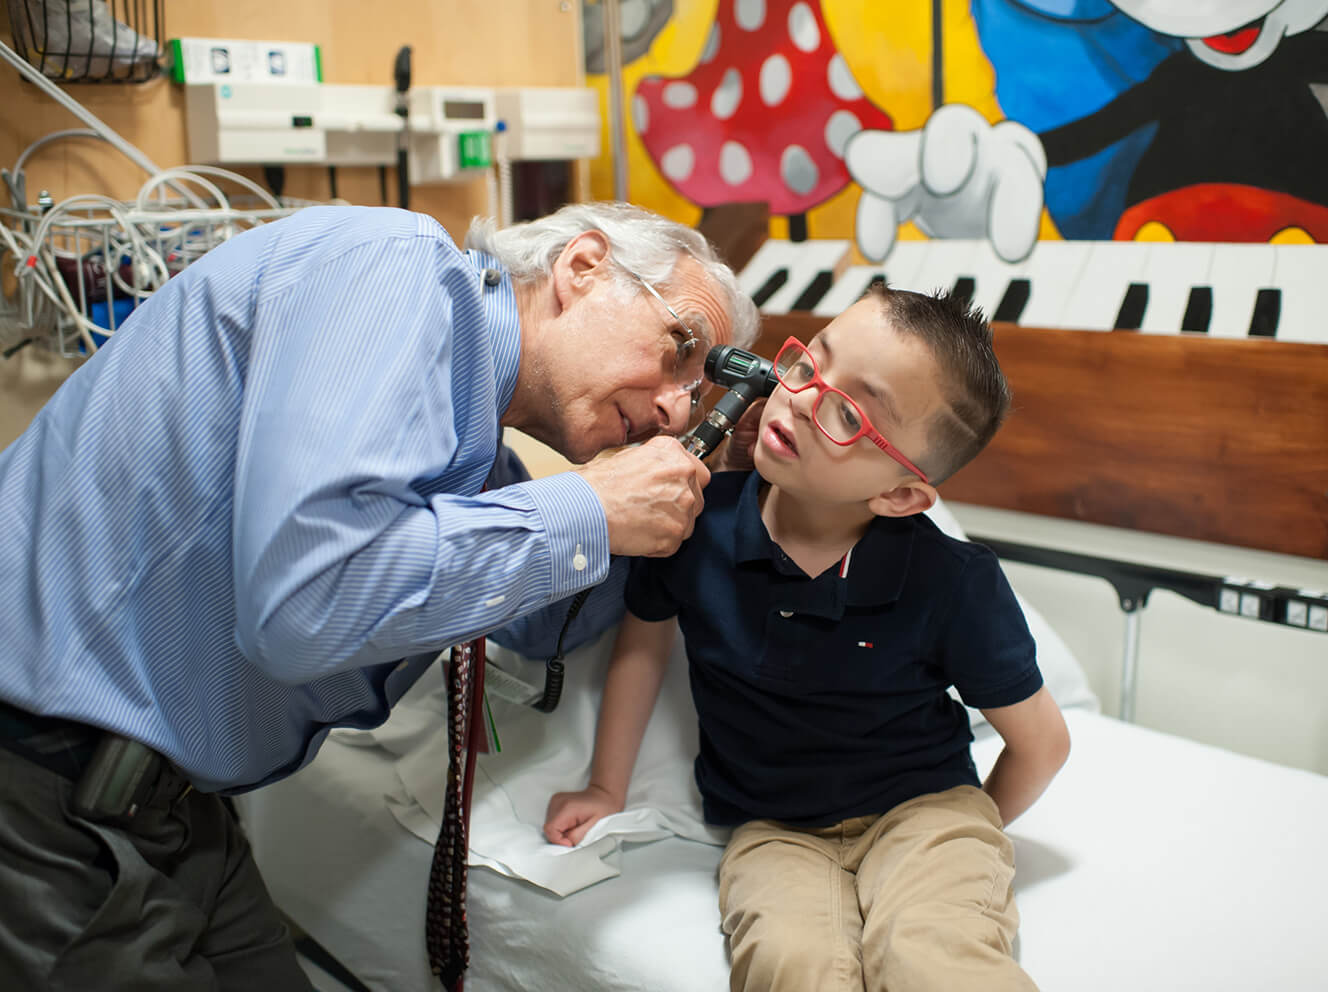 Howard Weinstein, MD, examines a patient in the Pediatric Hematology Oncology Clinic.